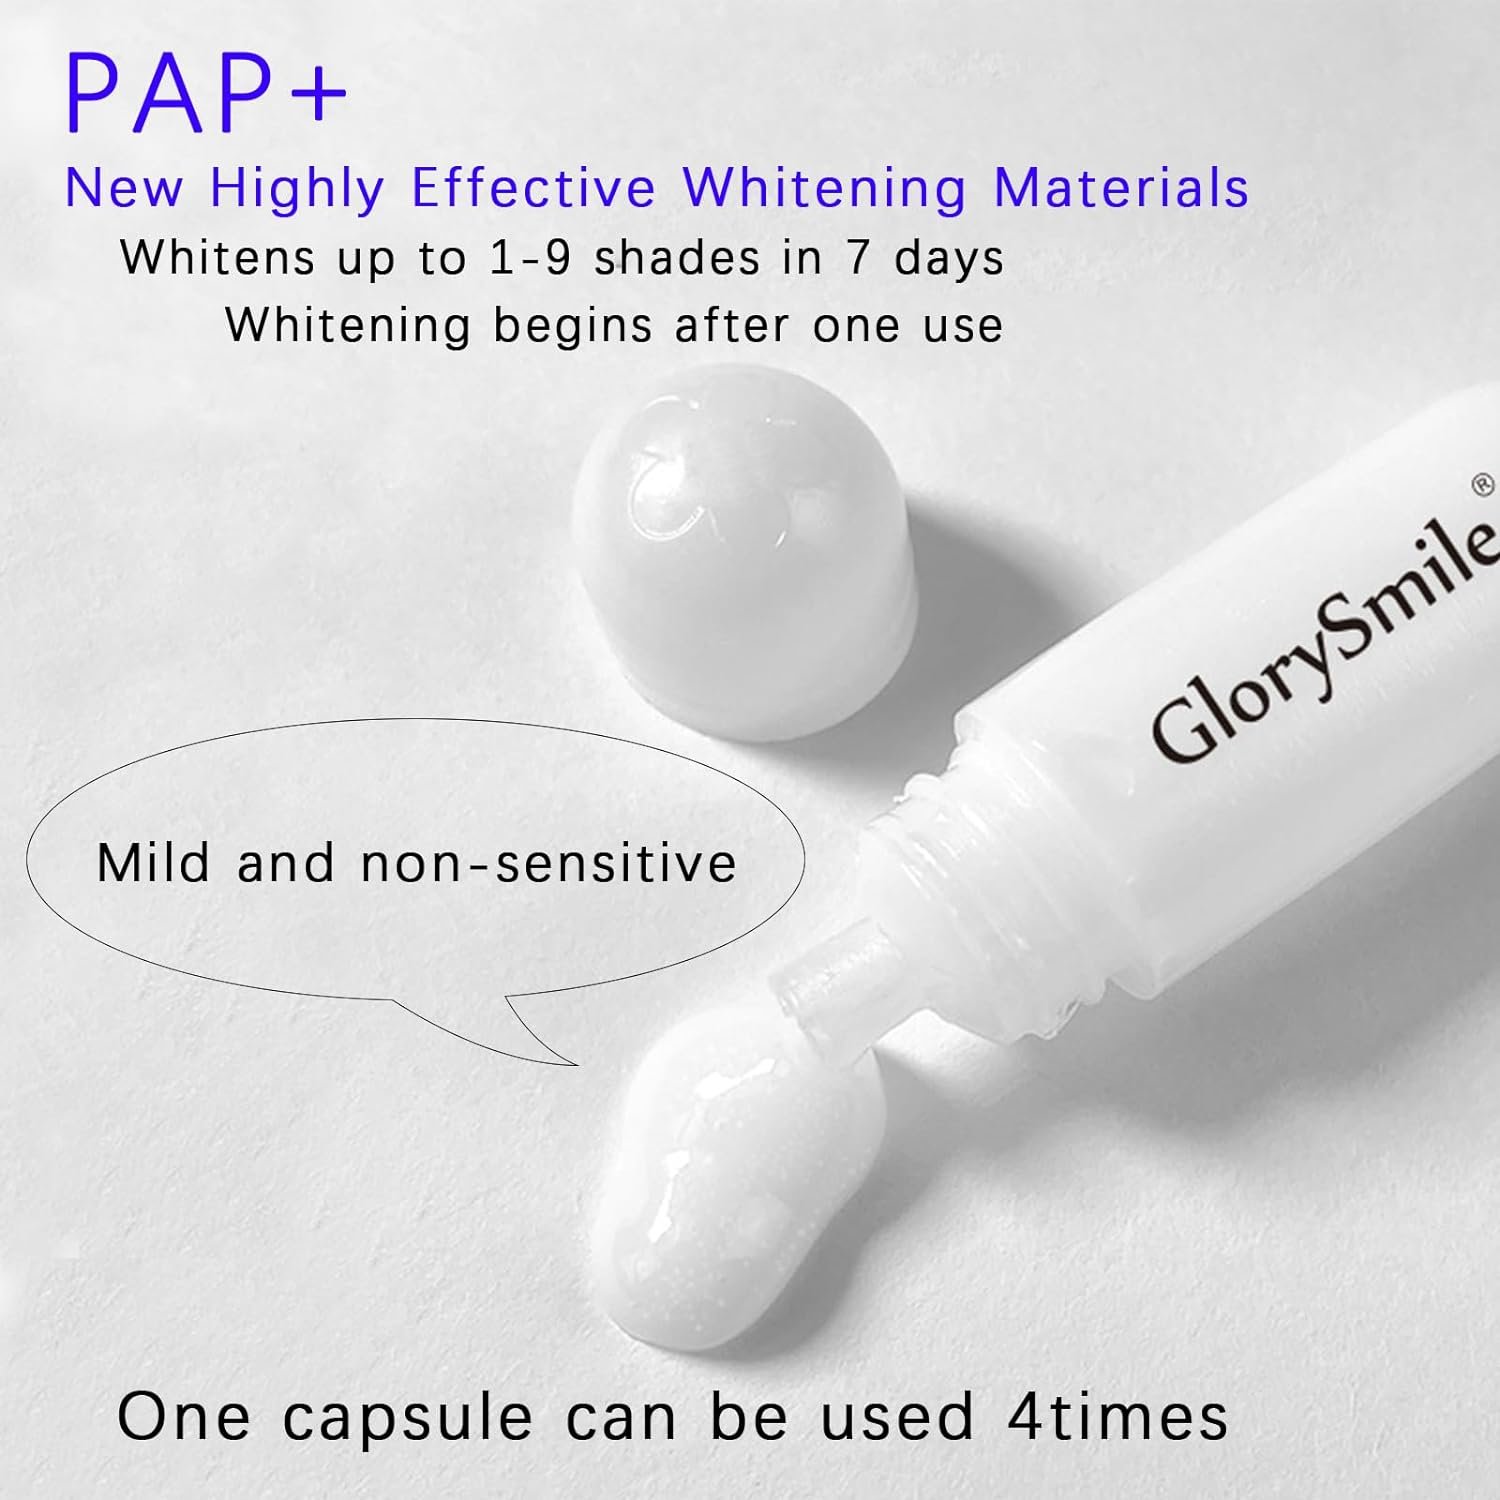 Teeth Whitening Kit - Pap + Gel Capsules (6 pcs), Replacement Trays for 3 People (3 pcs), 16x Accelerated Whitening Blue LED Light (1 pc) for Sensitive Teeth.